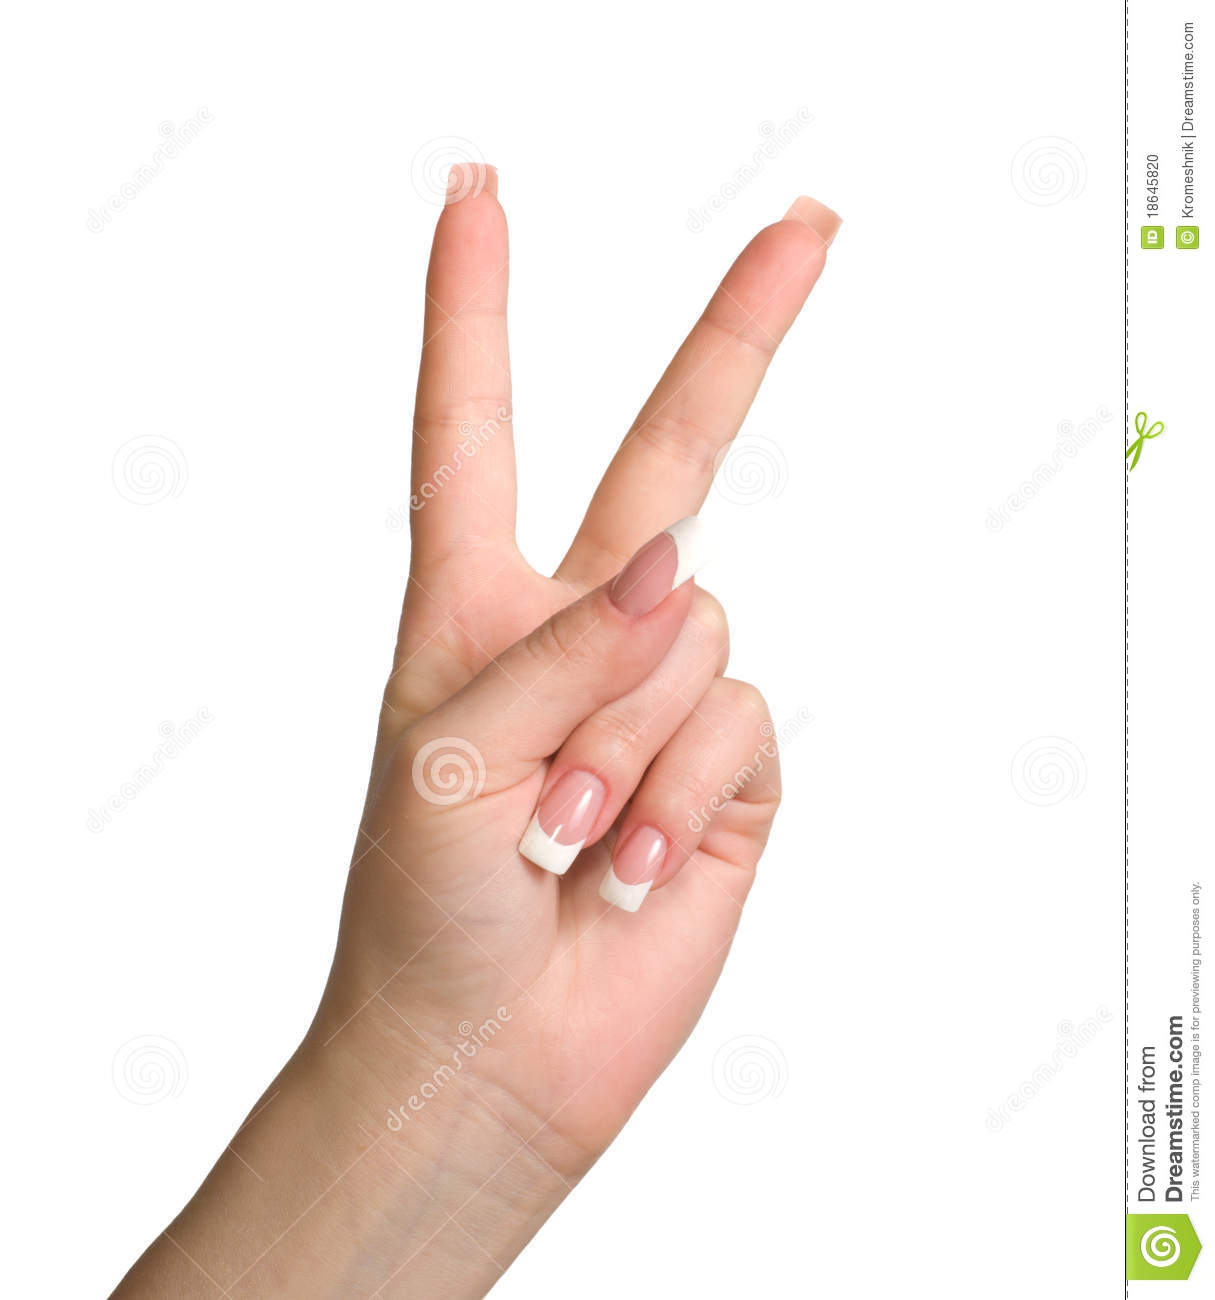 Women S Hand Shows The Gesture Of Victory Is Isolated On A White